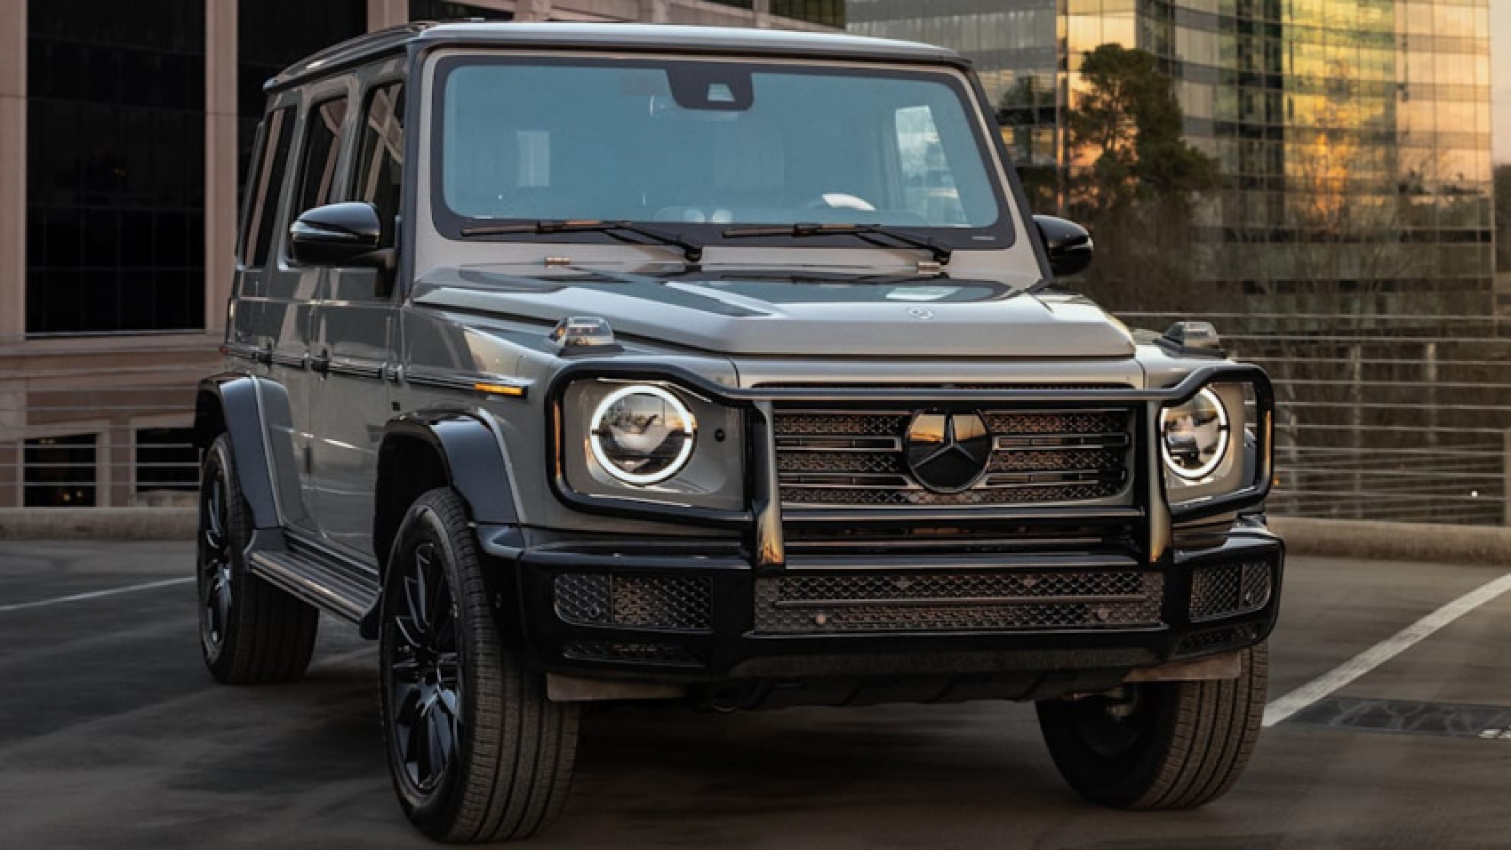 autos, cars, mercedes-benz, luxury, mercedes, off-road vehicles, mercedes-benz g-class edition 550 revealed, only 200 to be built